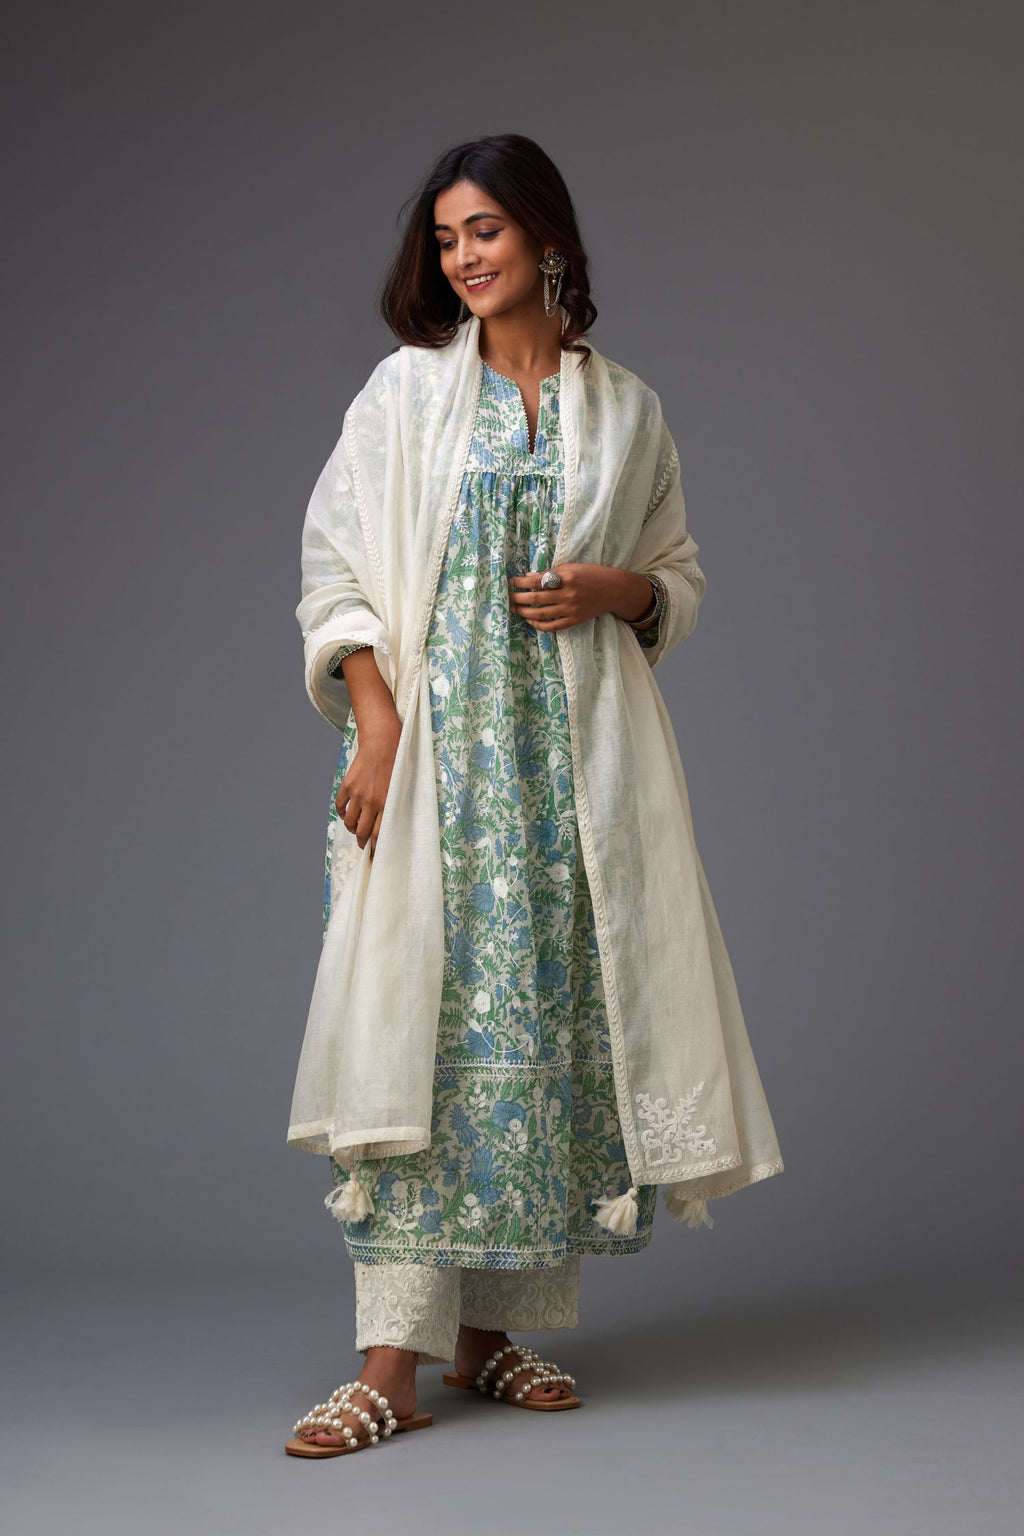 Off-white cotton chanderi dupatta with white dori embroidered border and bootas at all four corners.